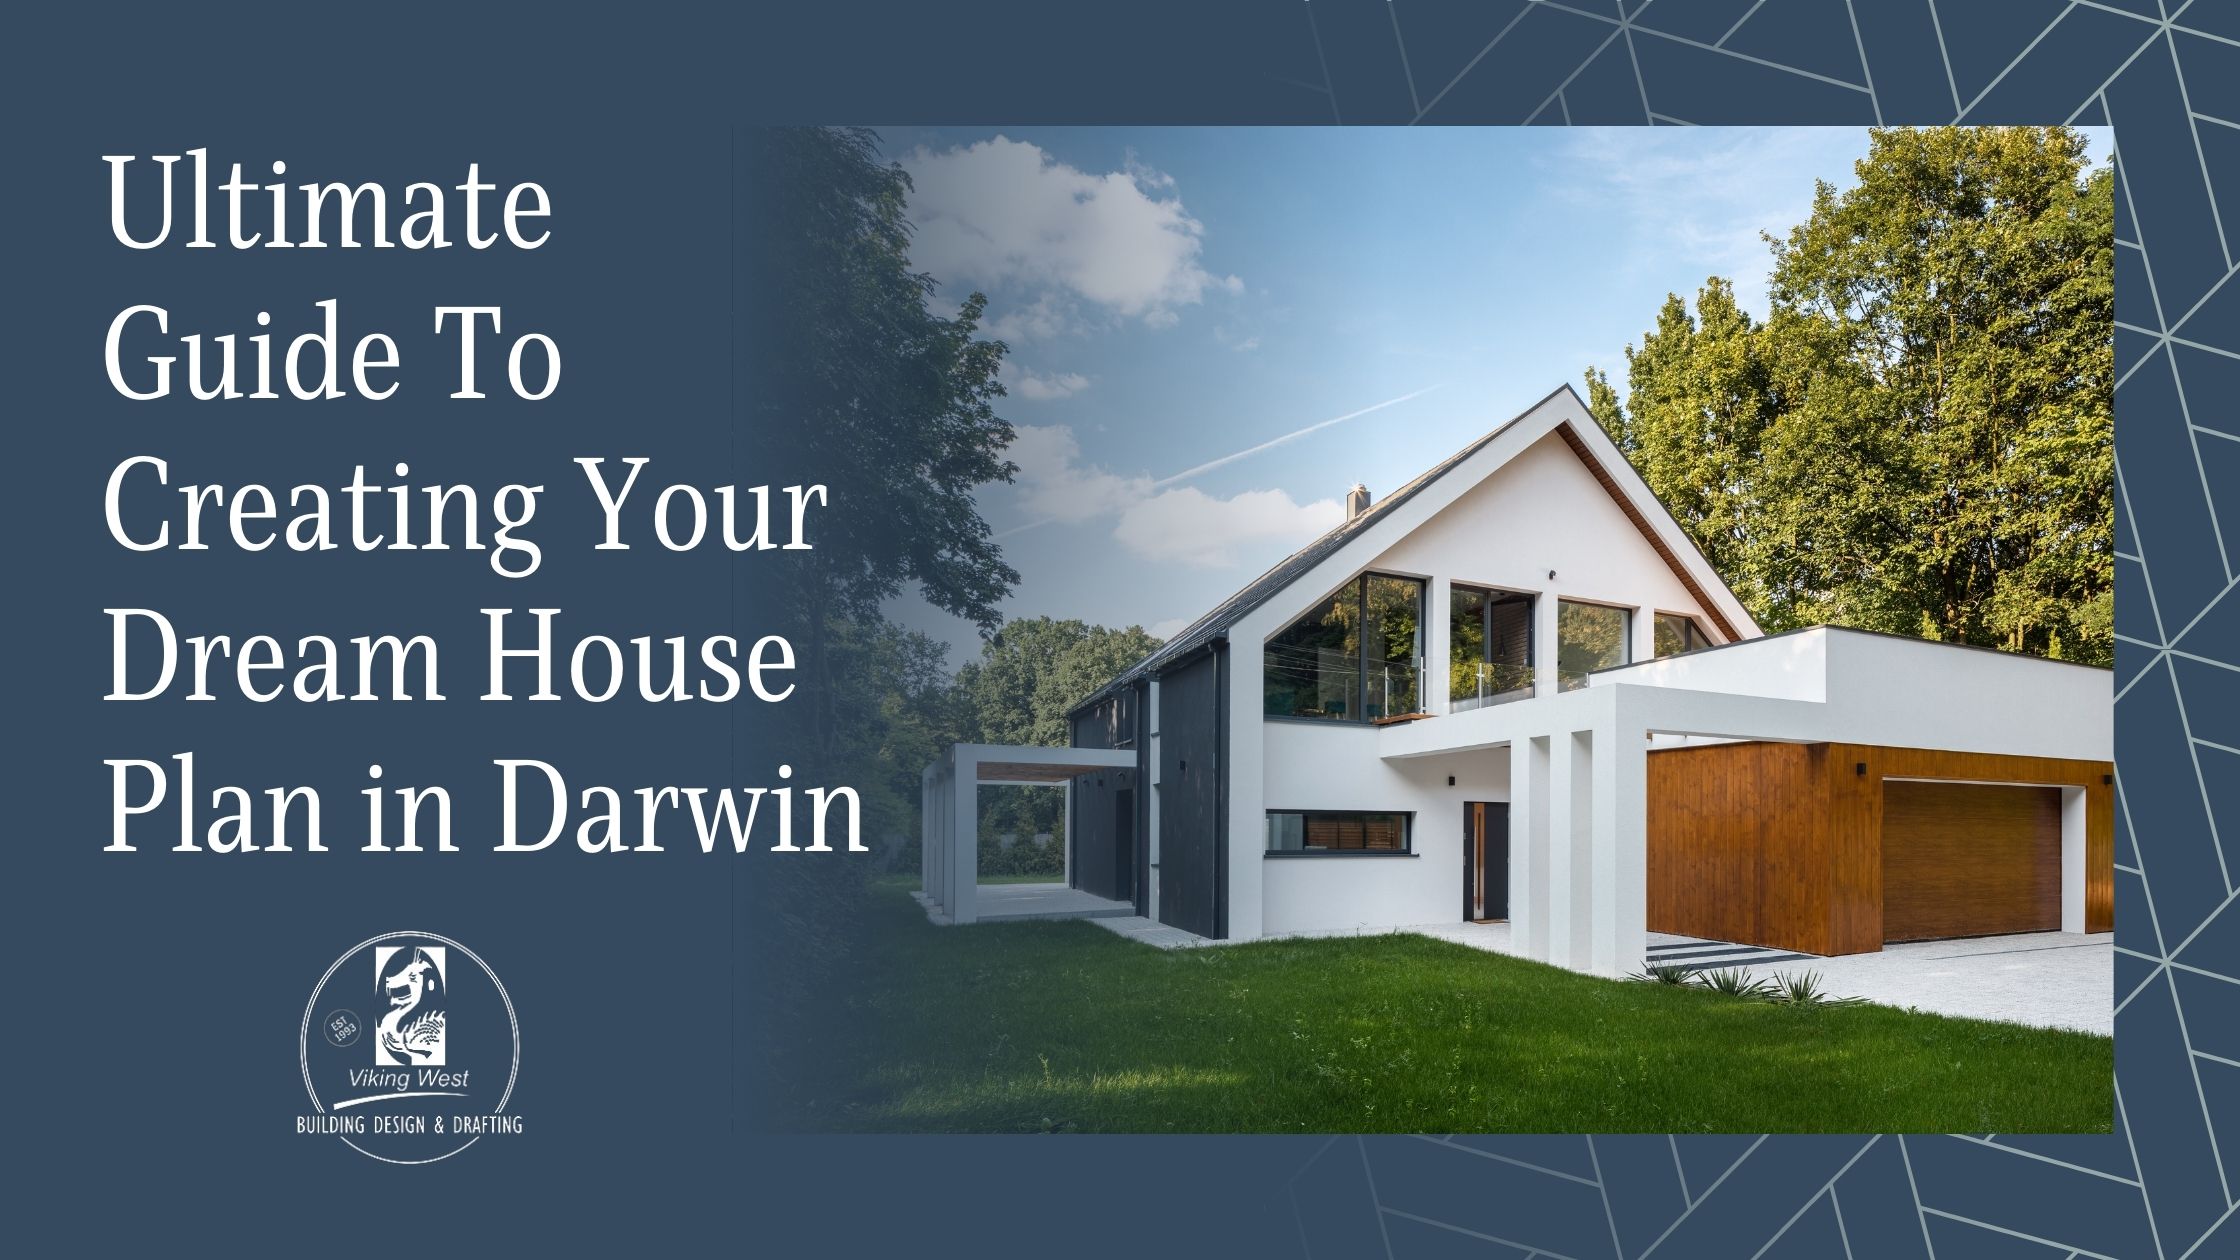 Ultimate Guide To Creating Your Dream House Plan in Darwin